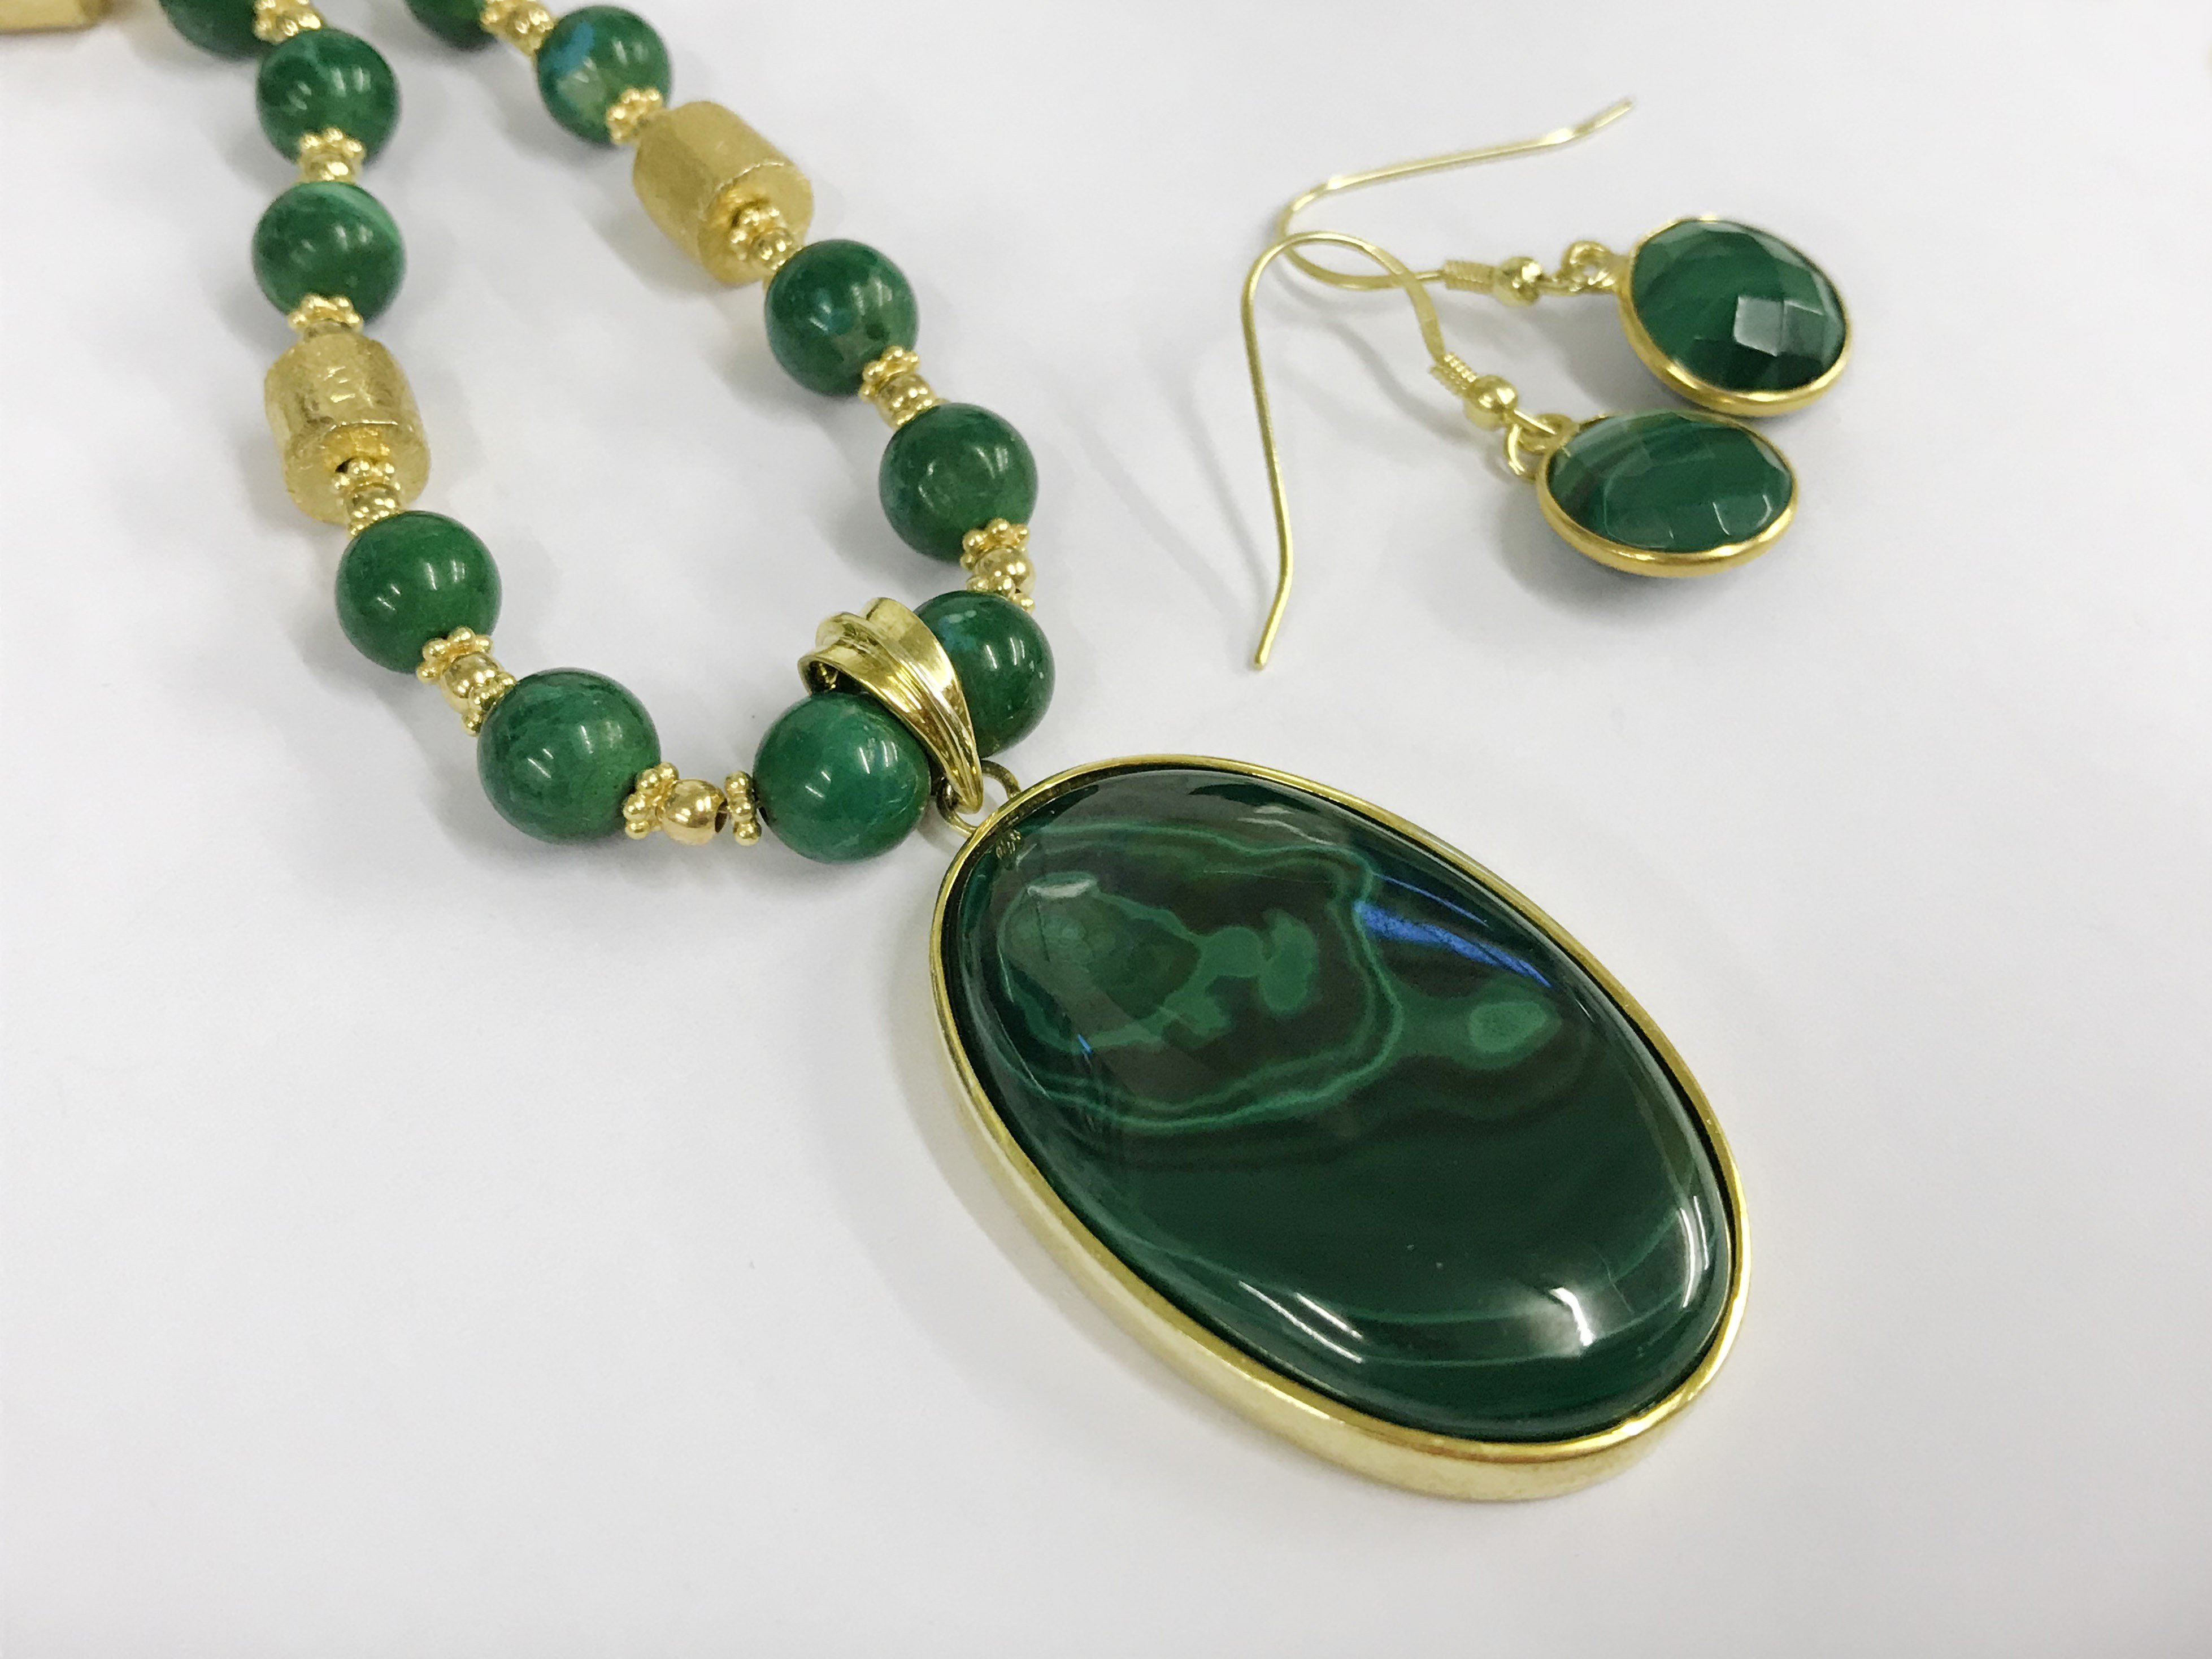 14k gilt sterling silver malachite necklace and earrings - Image 3 of 3